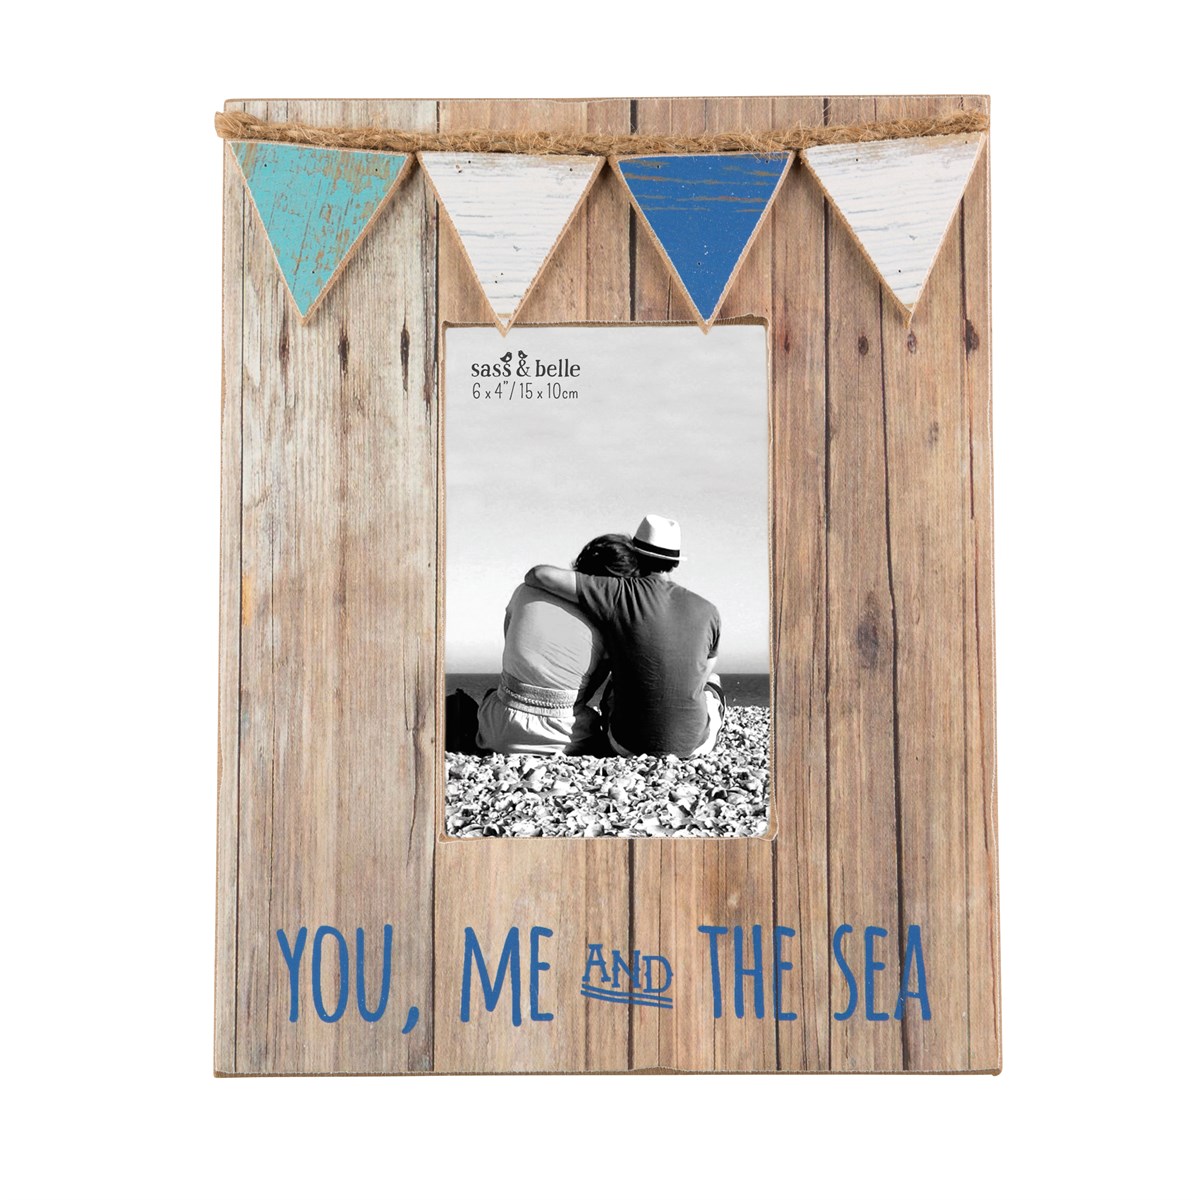 Sass & Belle  Marco Foto "You, Me and The Sea"